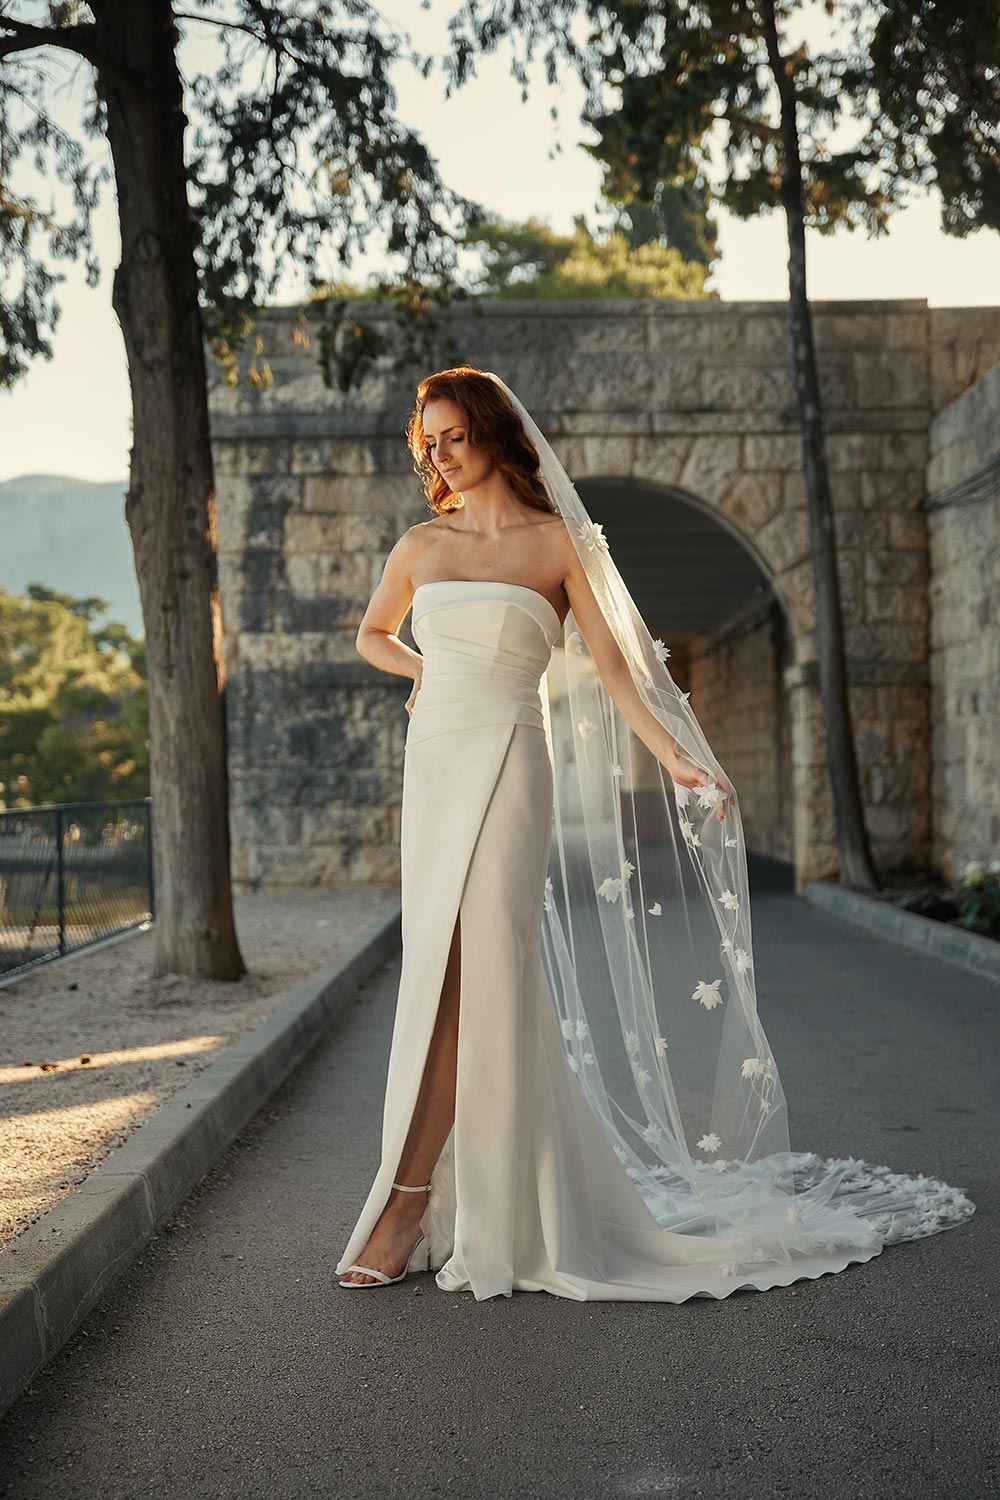 Mara, a minimalist bridal gown with stunning silhouette. Strapless wedding dress in heavyweight Japanese stretch polyester with a seductive split.. Vinka Design.